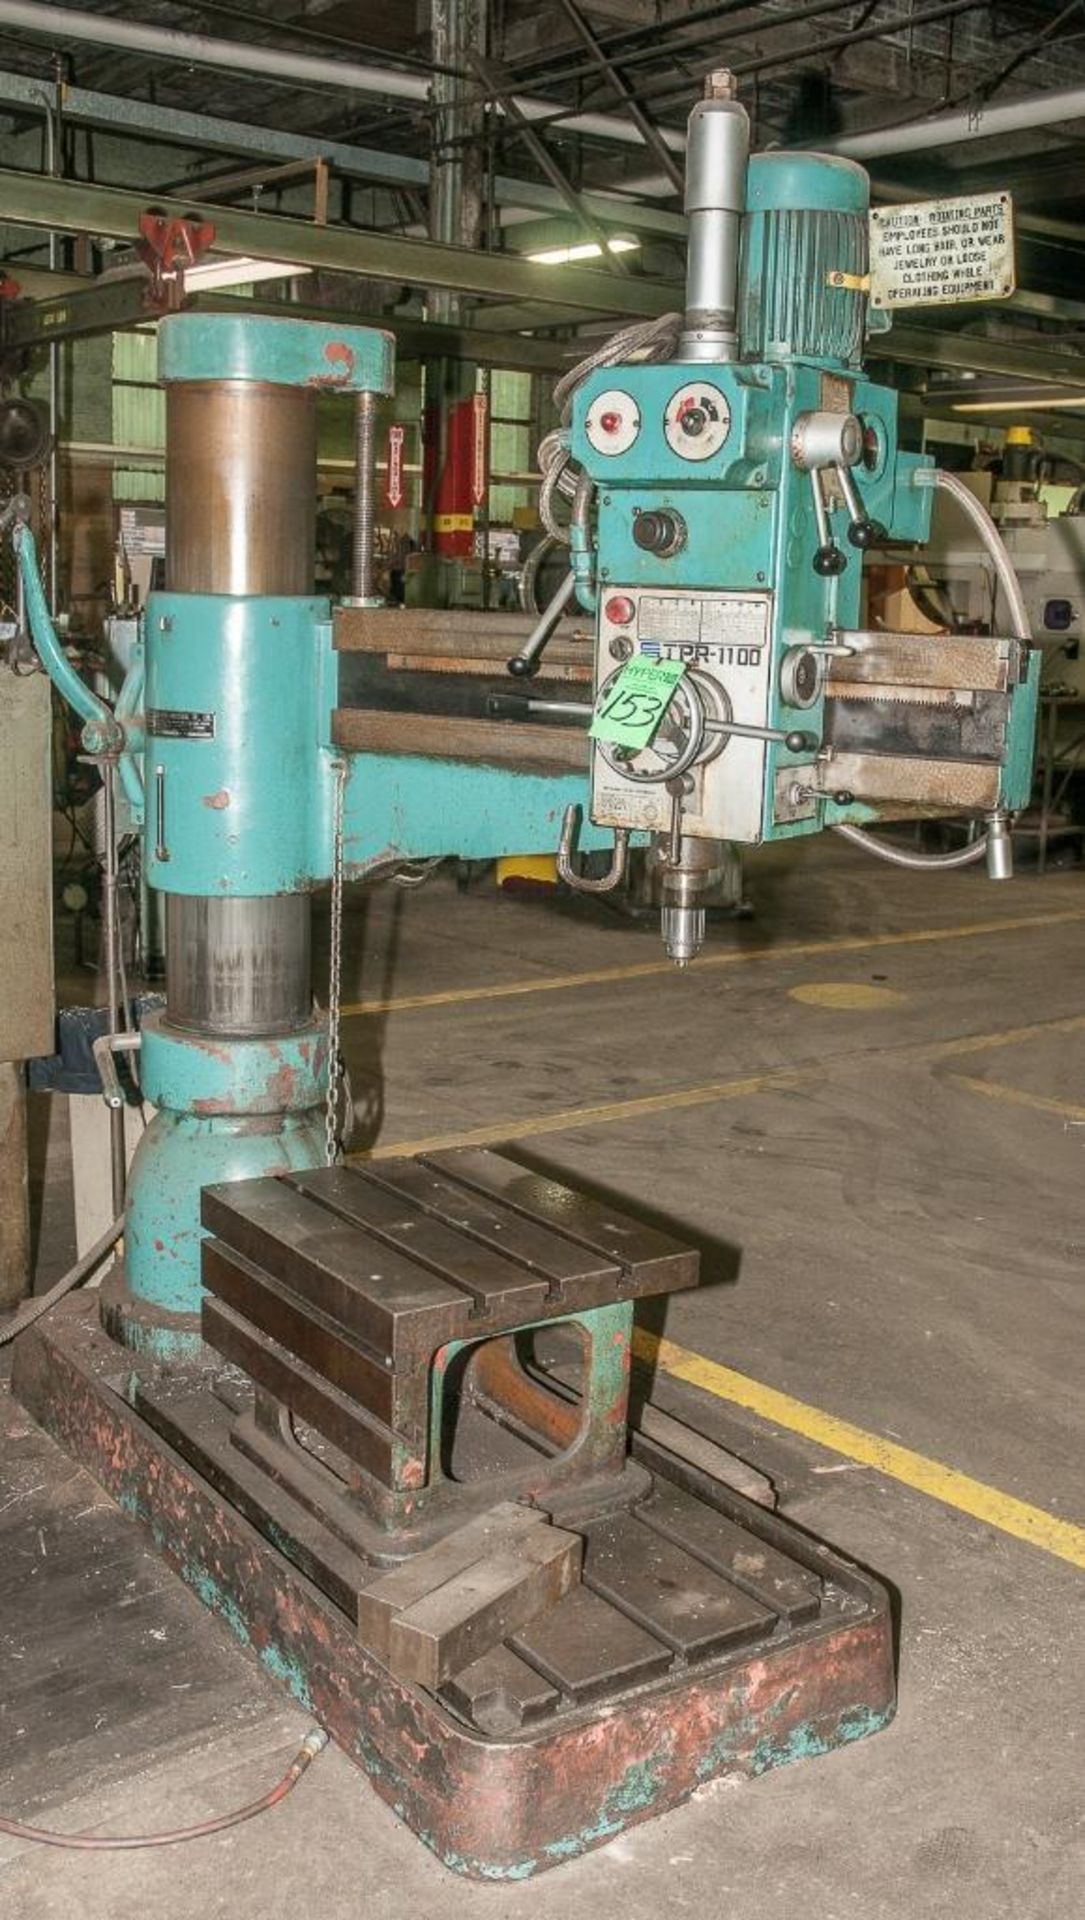 Tai Piin Model TPR-1100, 3' X 9" Column Radial Drill, S/N 8467, (1981), (12) Speed From 44 To 1500 R